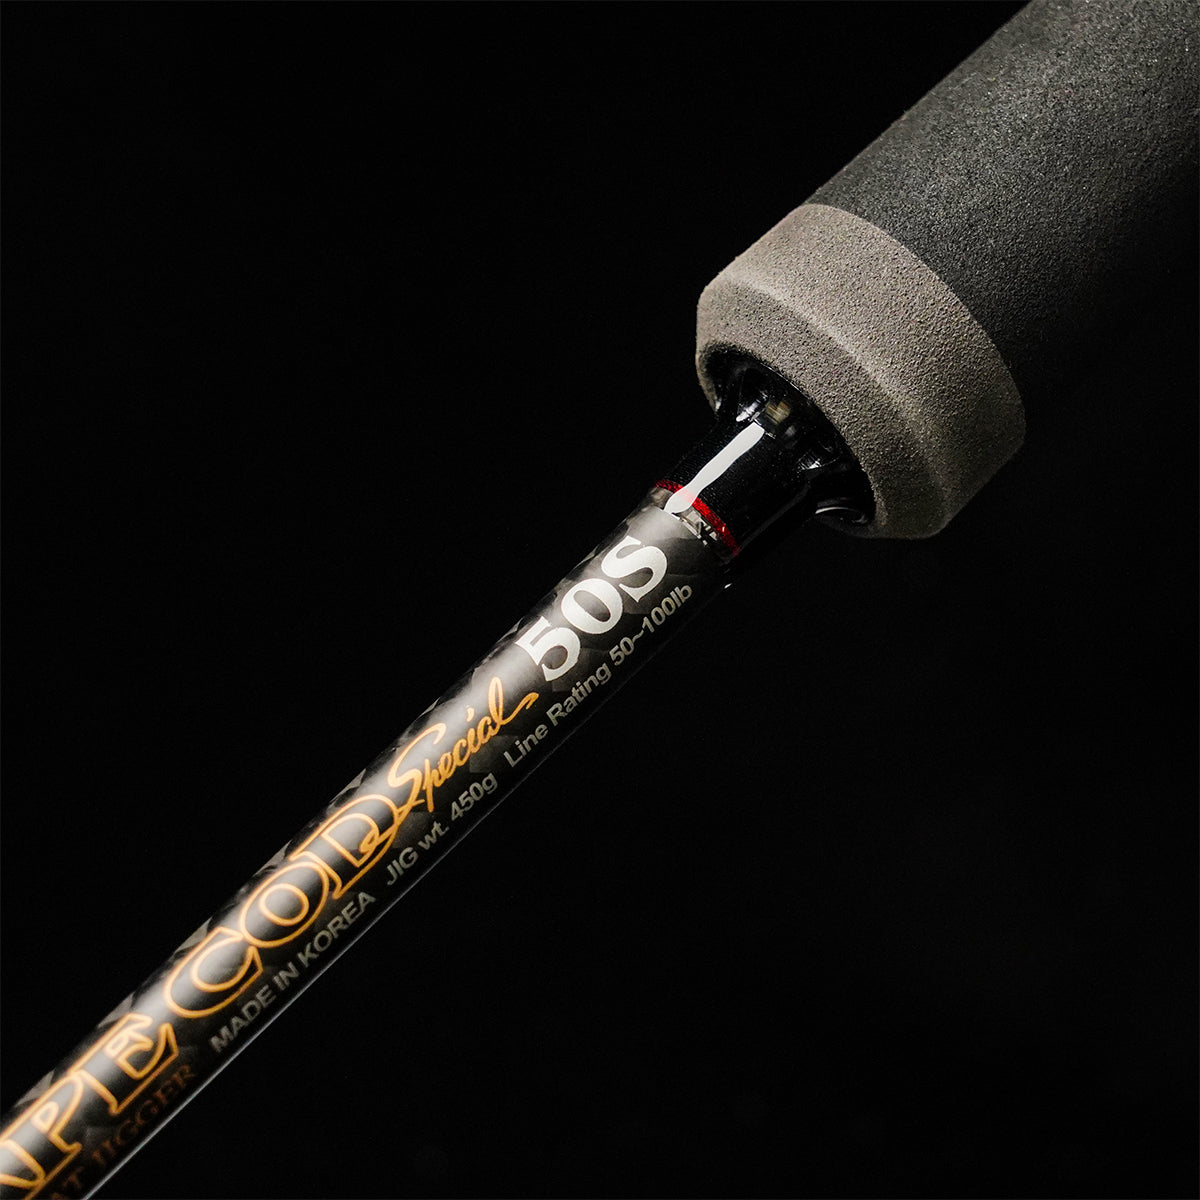 Cape Cod Special 450g 50S Spinning Rod